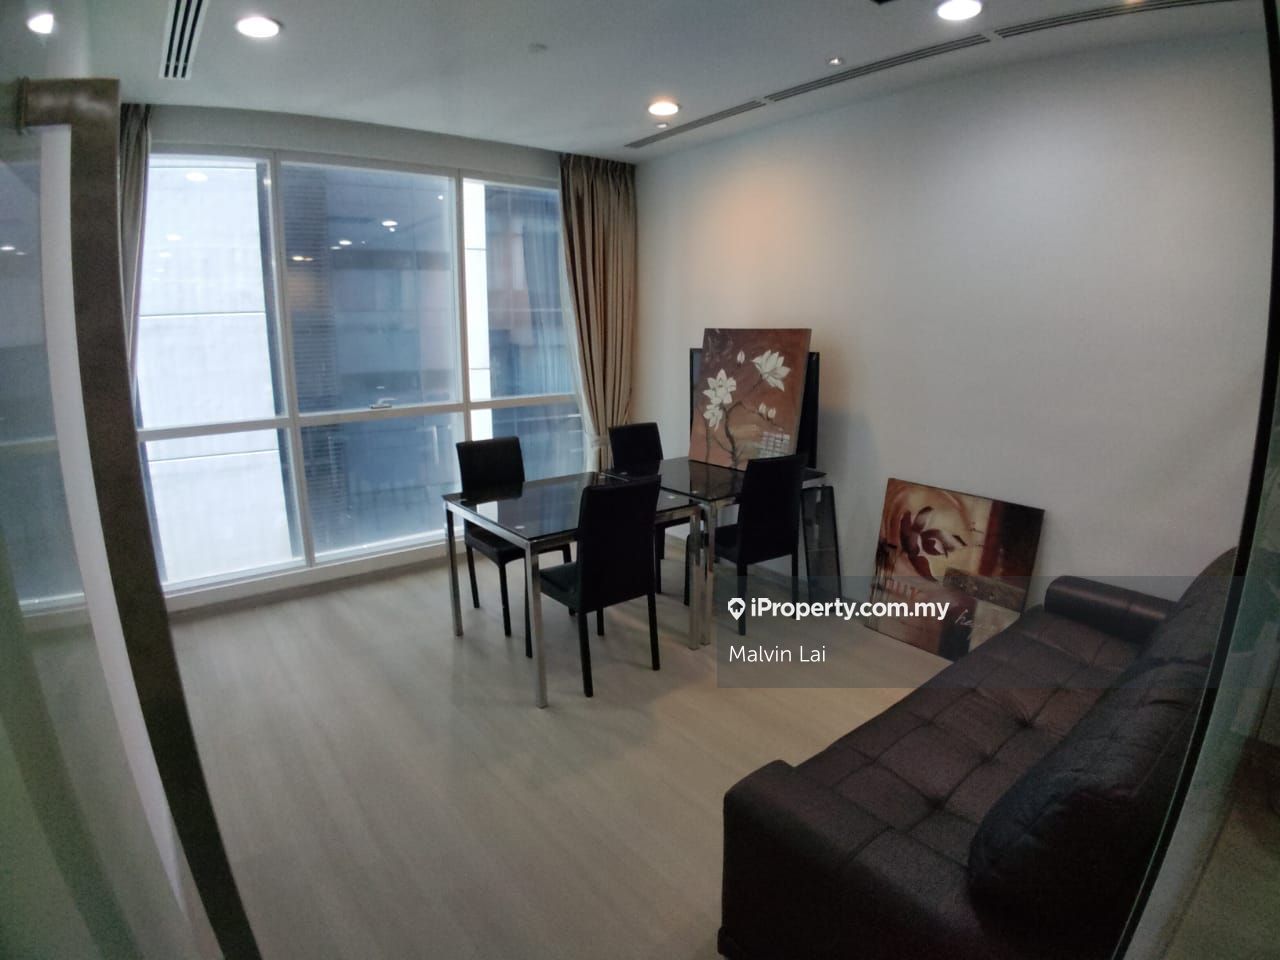 3 Office Room, 3 Bathroom, Fully furnished